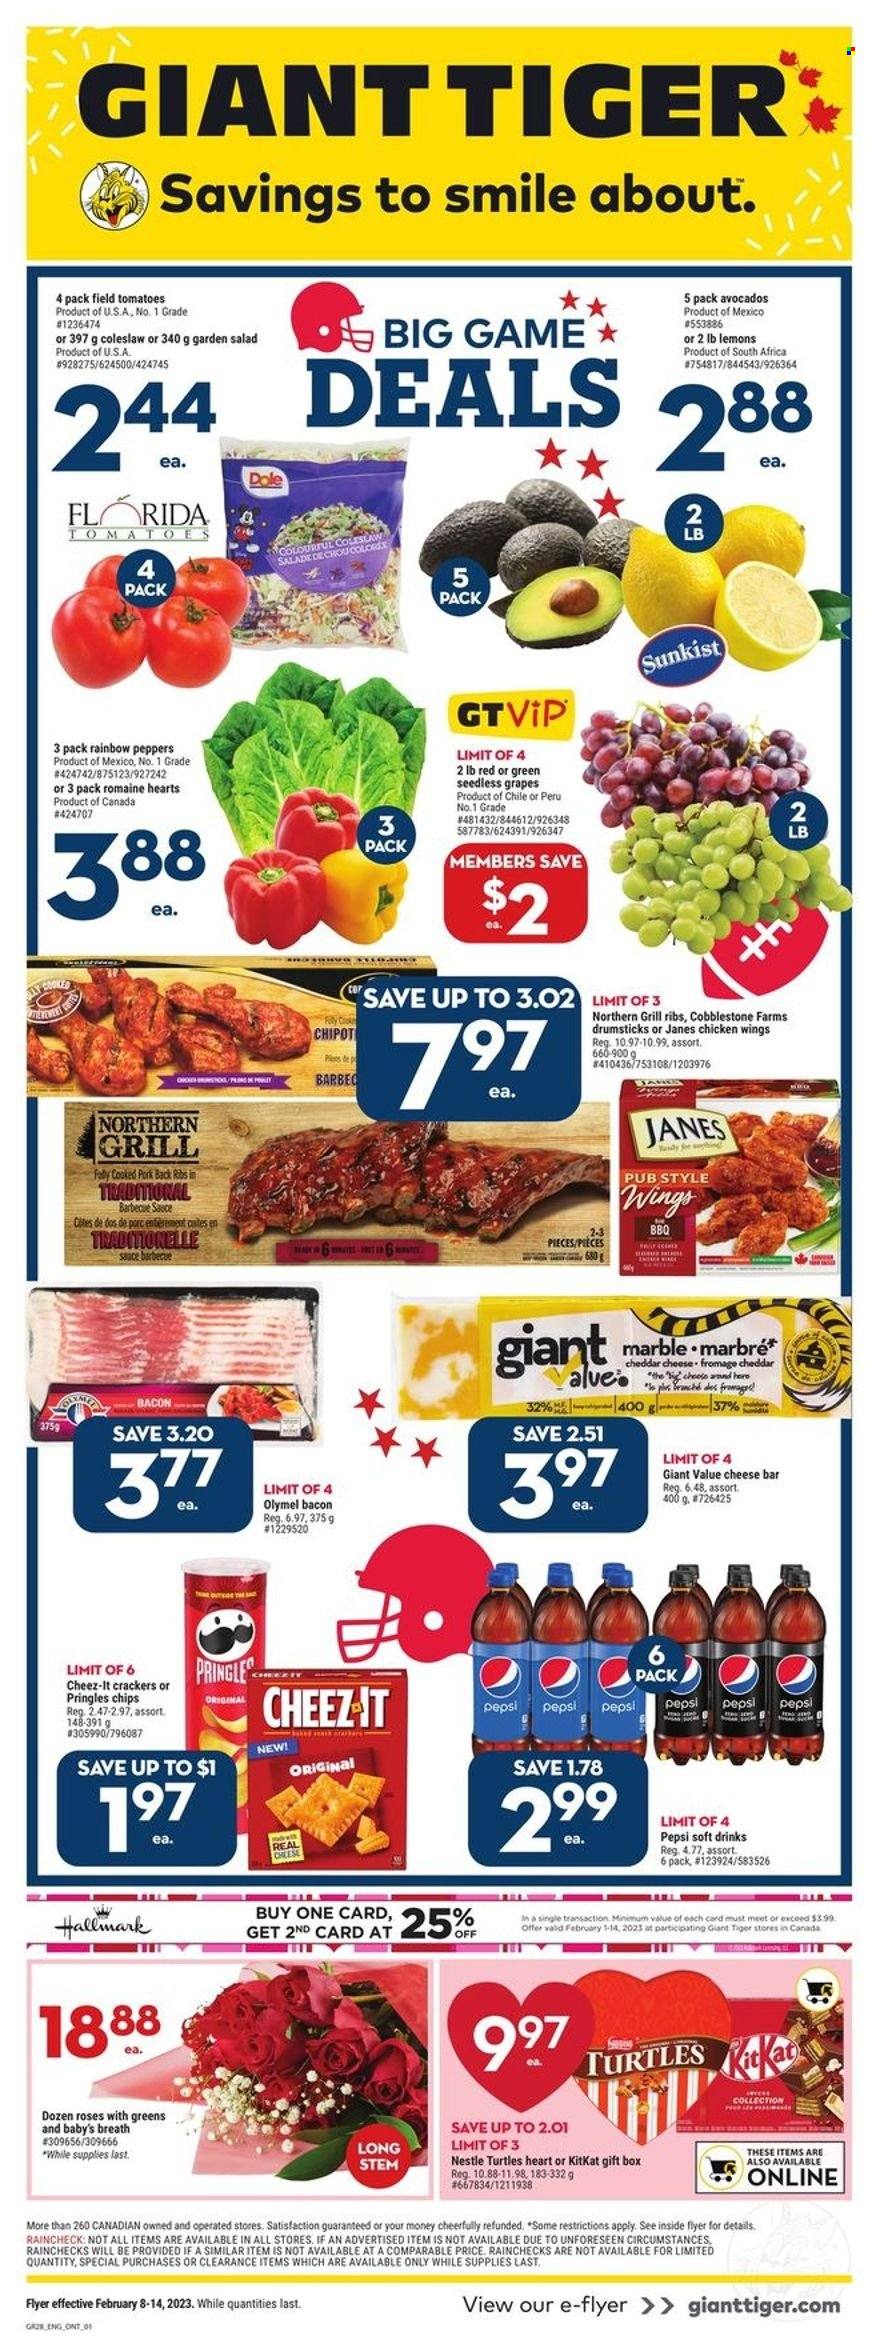 thumbnail - Giant Tiger Flyer - February 08, 2023 - February 14, 2023 - Sales products - tomatoes, salad, Dole, peppers, avocado, grapes, seedless grapes, lemons, coleslaw, sauce, bacon, chicken wings, KitKat, crackers, Pringles, chips, Cheez-It, BBQ sauce, Pepsi, soft drink, ribs, pork meat, pork ribs, pork back ribs, gift box, turtles, rose, Nestlé. Page 1.